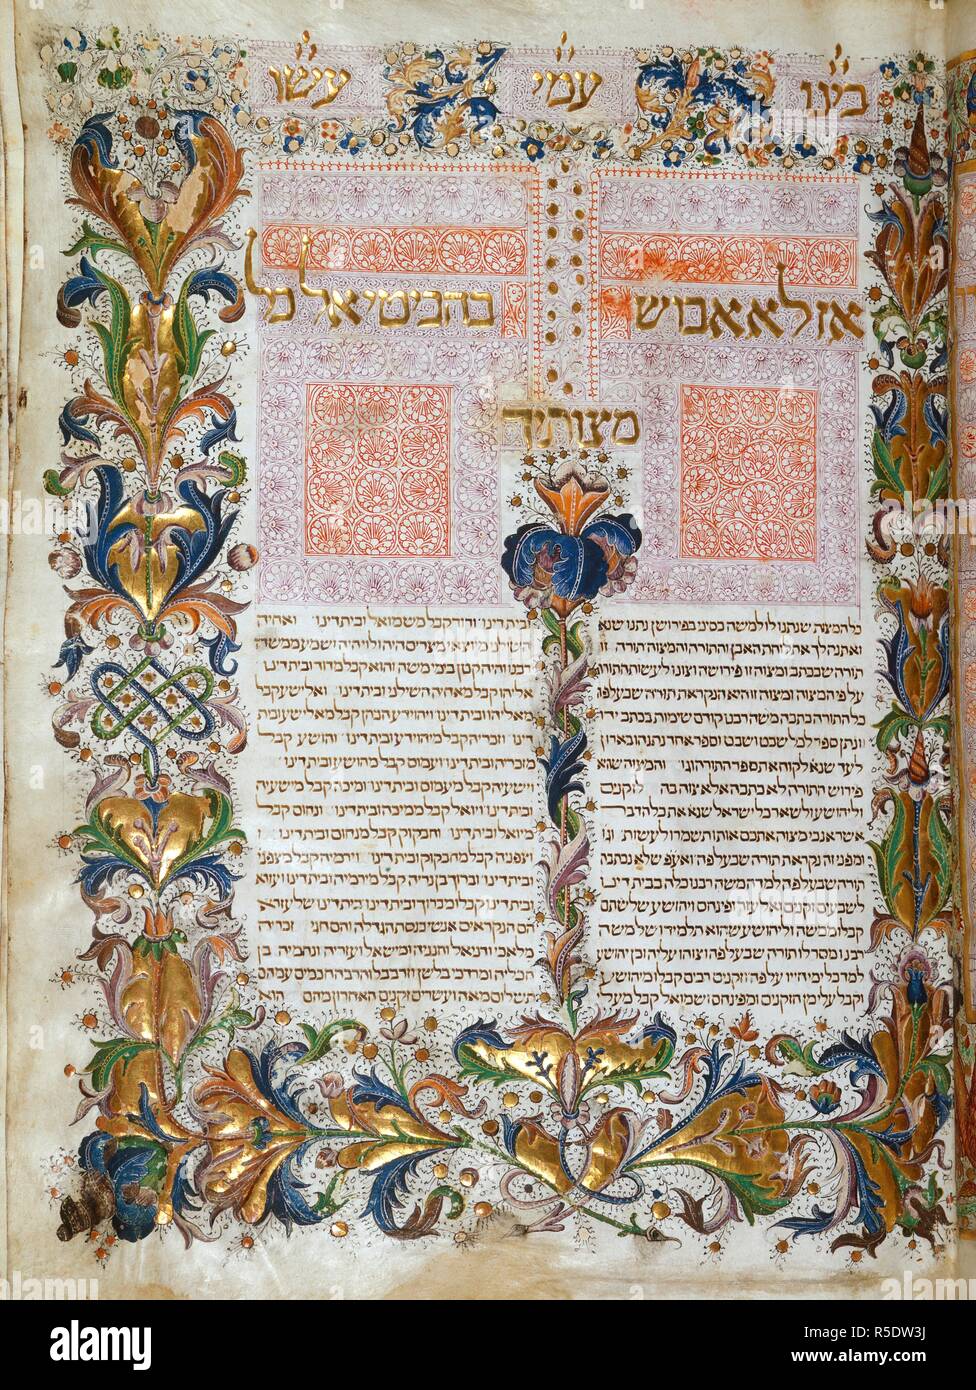 Illuminated frontispiece with lush borders and lacy filigree panels. Hispano-Moresque Haggadah. Castile, Spain, c. 1300. Illuminated frontispiece with lush borders and lacy filigree panels.  Image taken from Hispano-Moresque Haggadah.  Originally published/produced in Castile, Spain, c. 1300 . . Source: Harley 5698, f.12. Language: Hebrew. Stock Photo